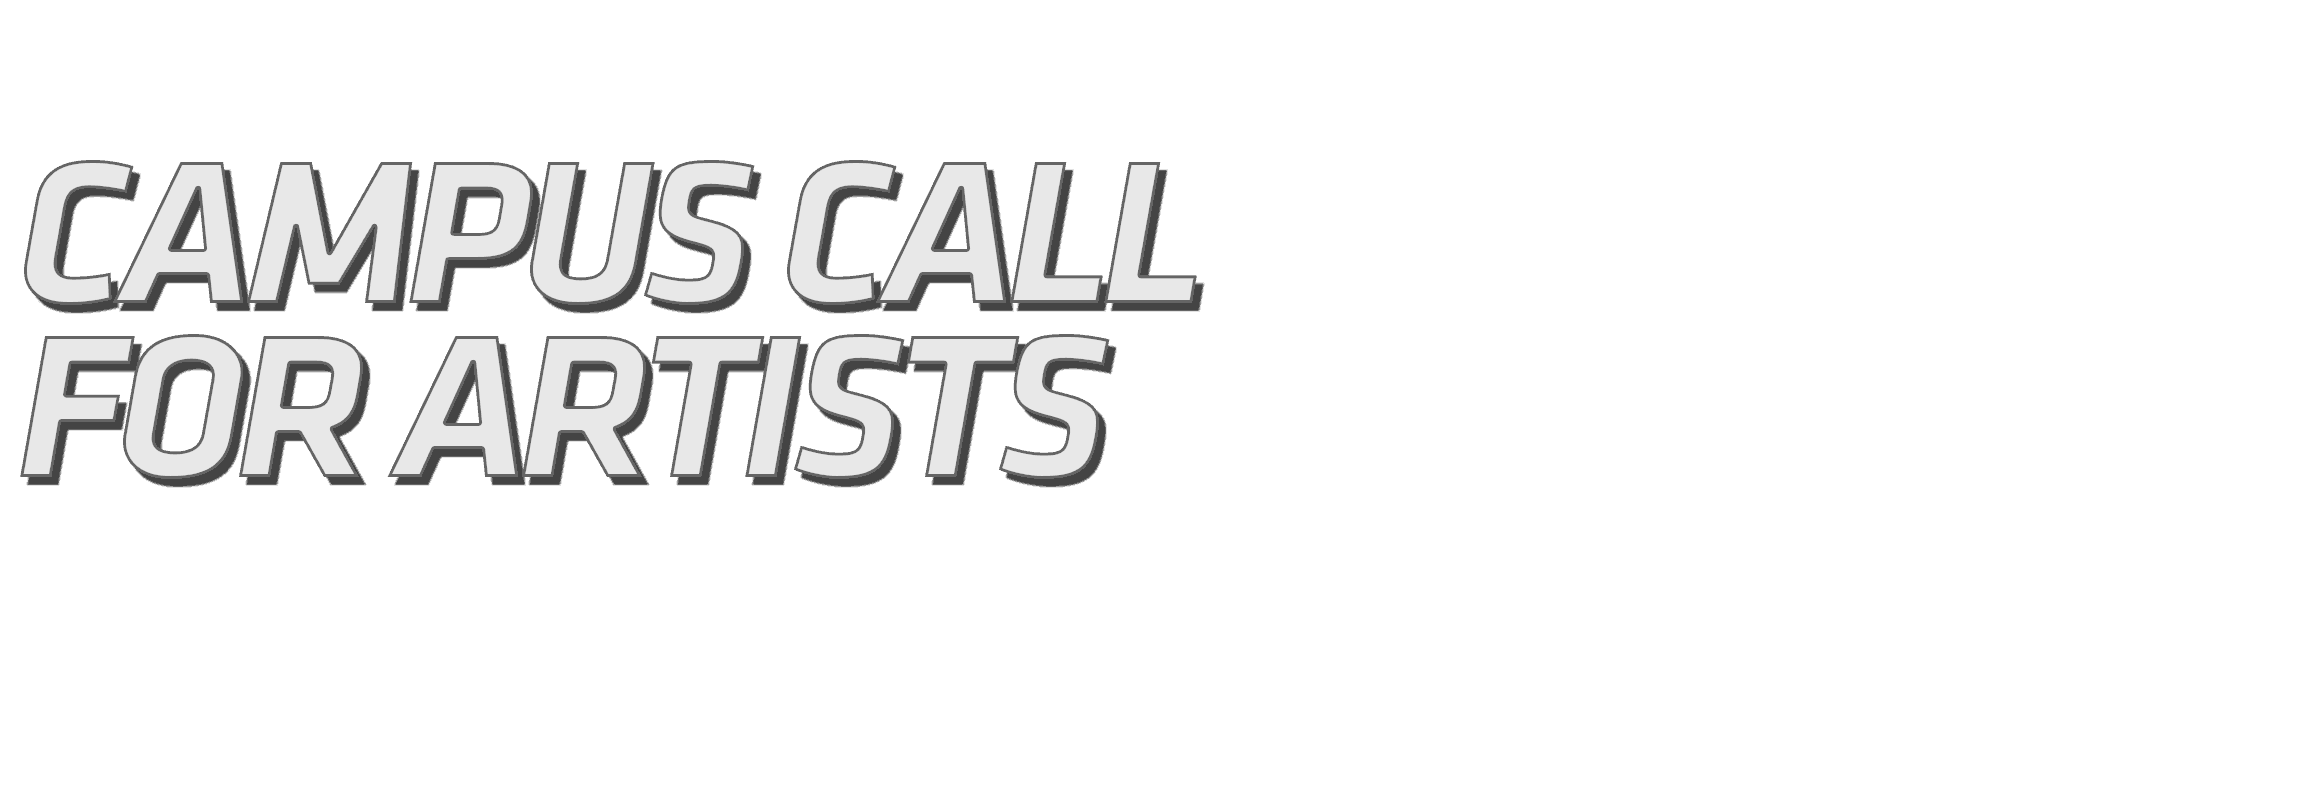 campus call for artists